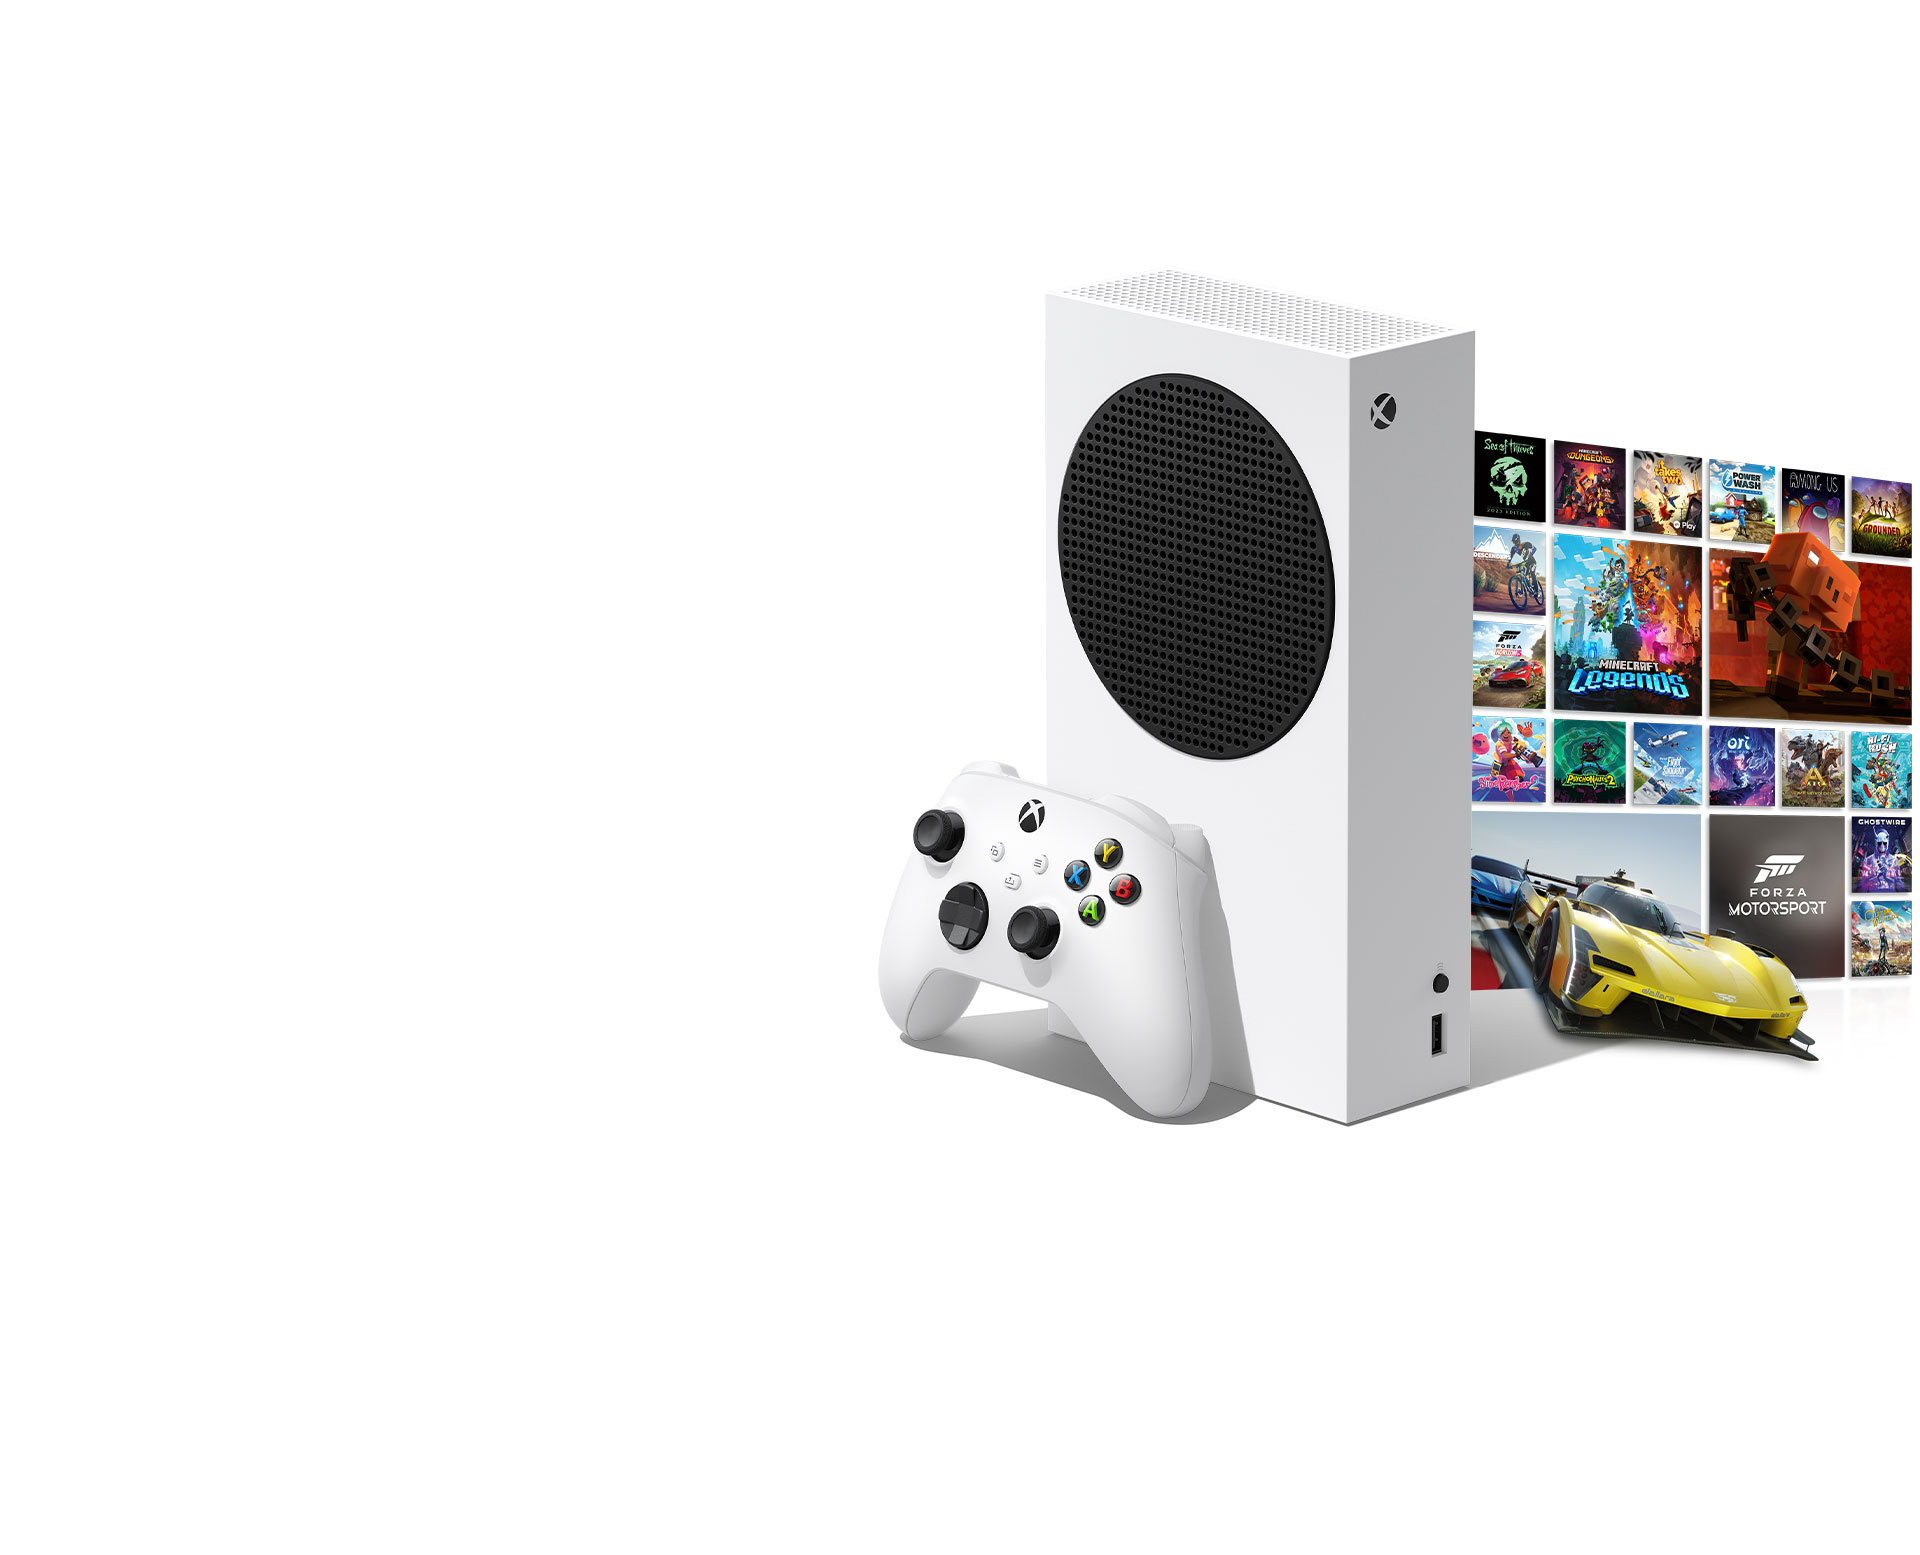 Xbox Series S with Robot White controller and a card that says Xbox Game Pass Ultimate on it, with a mosaic of box shots depicting games available with Xbox Game Pass to the right